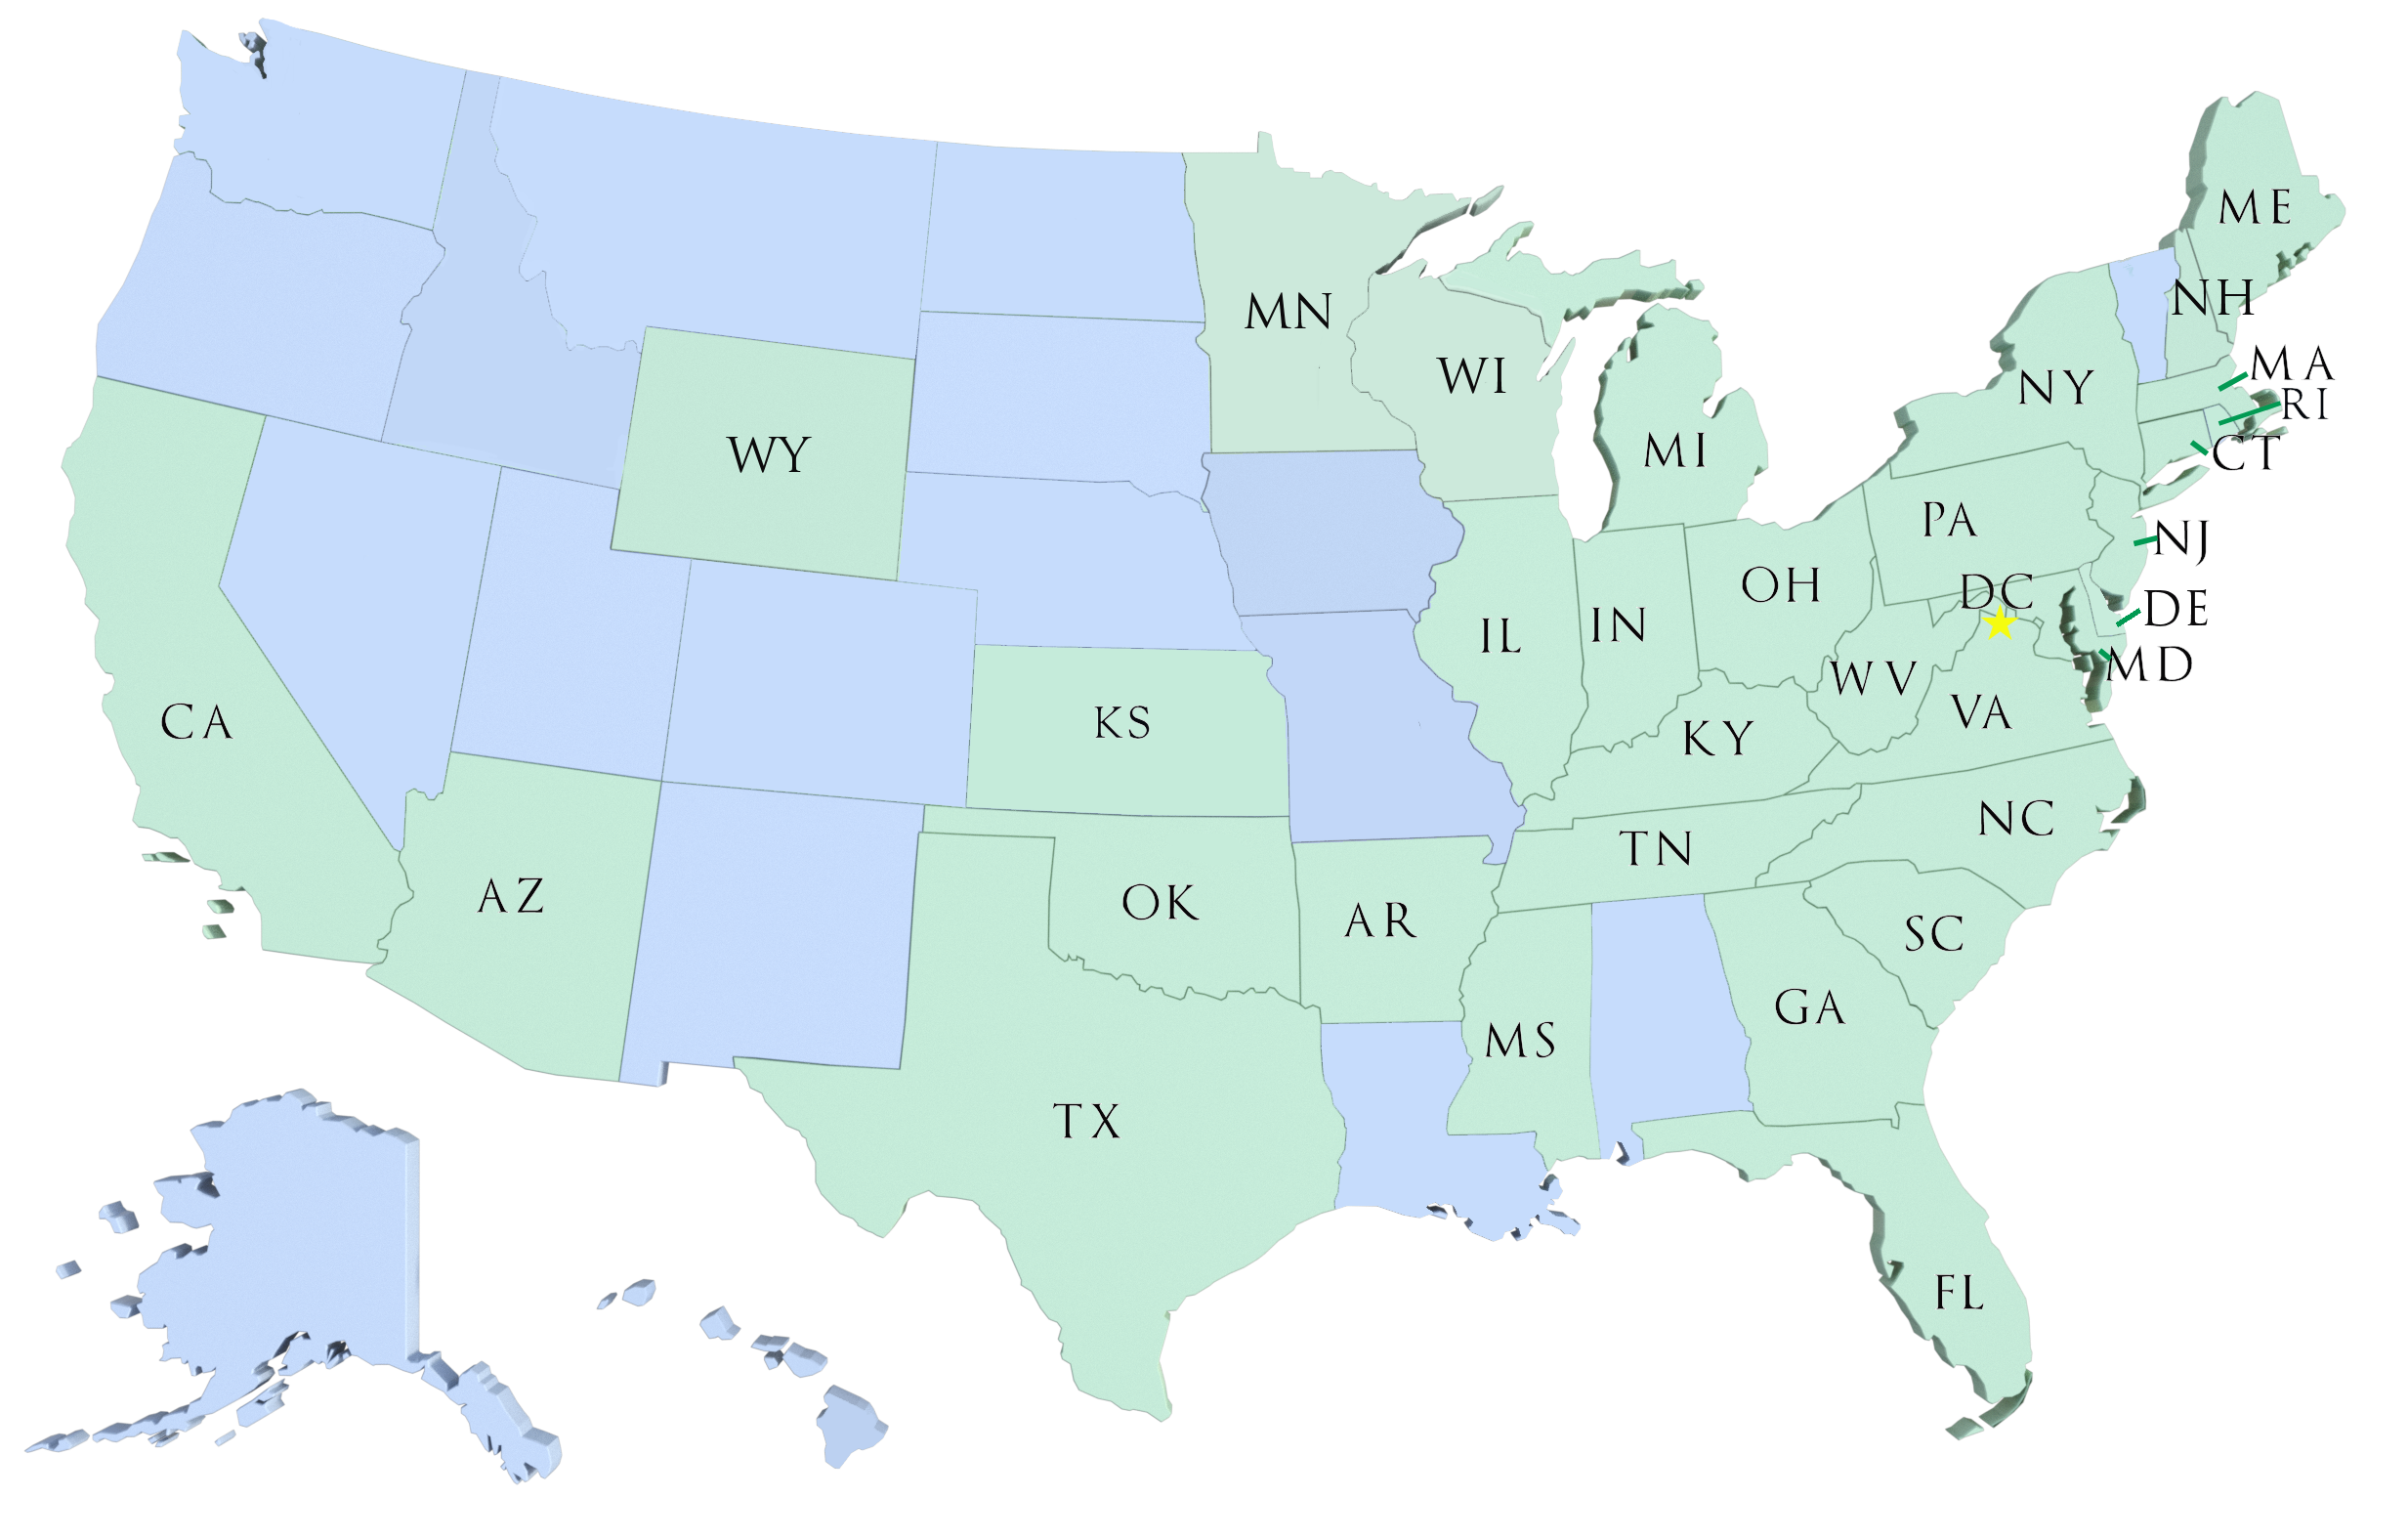 United states map showing states where students were placed, includes 31 states : CA, AZ, WY, KS, OK, TX, AR, MN, WI, IL, MS, MI, IN, KY, TN, OH, WV, VA, NC, SC, GA, FL, MD, NJ, PA, CT, RI, MA, NY, NH, ME)